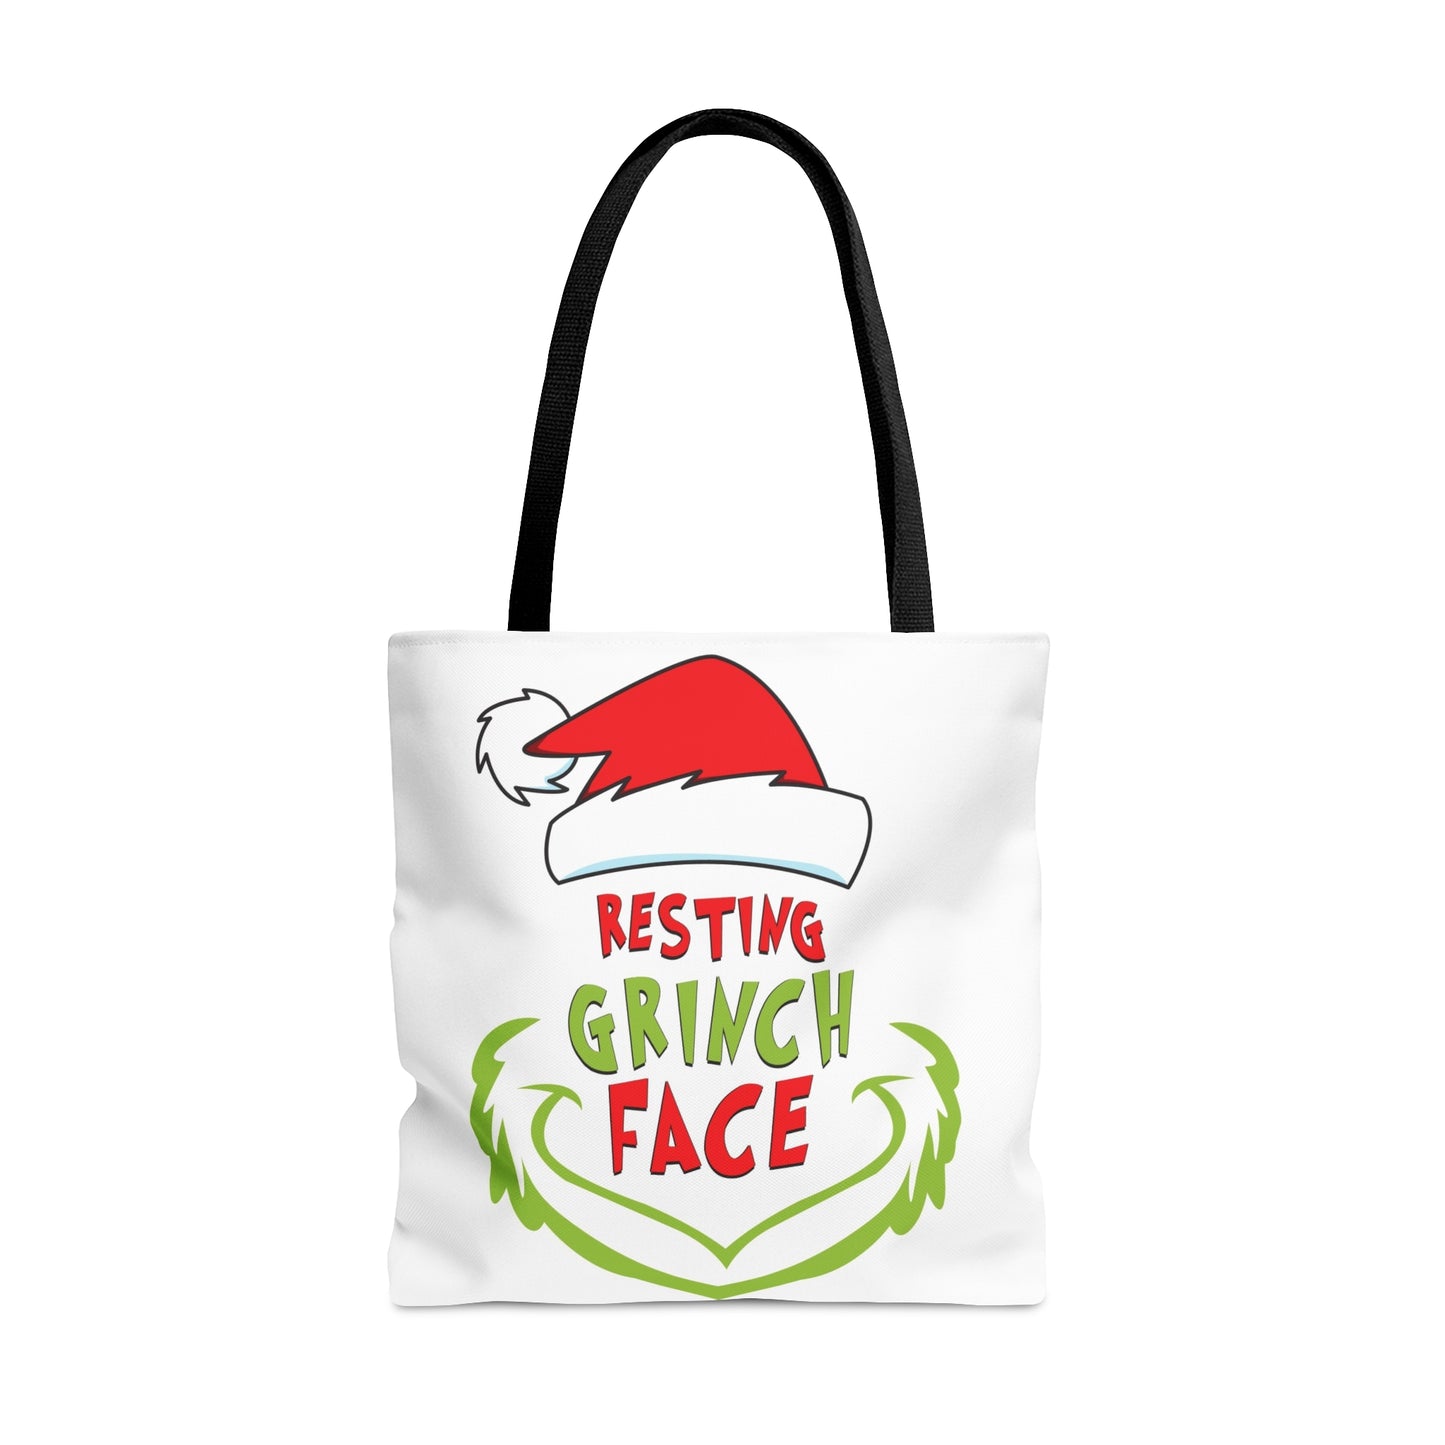 Resting grinch face Tote Bag